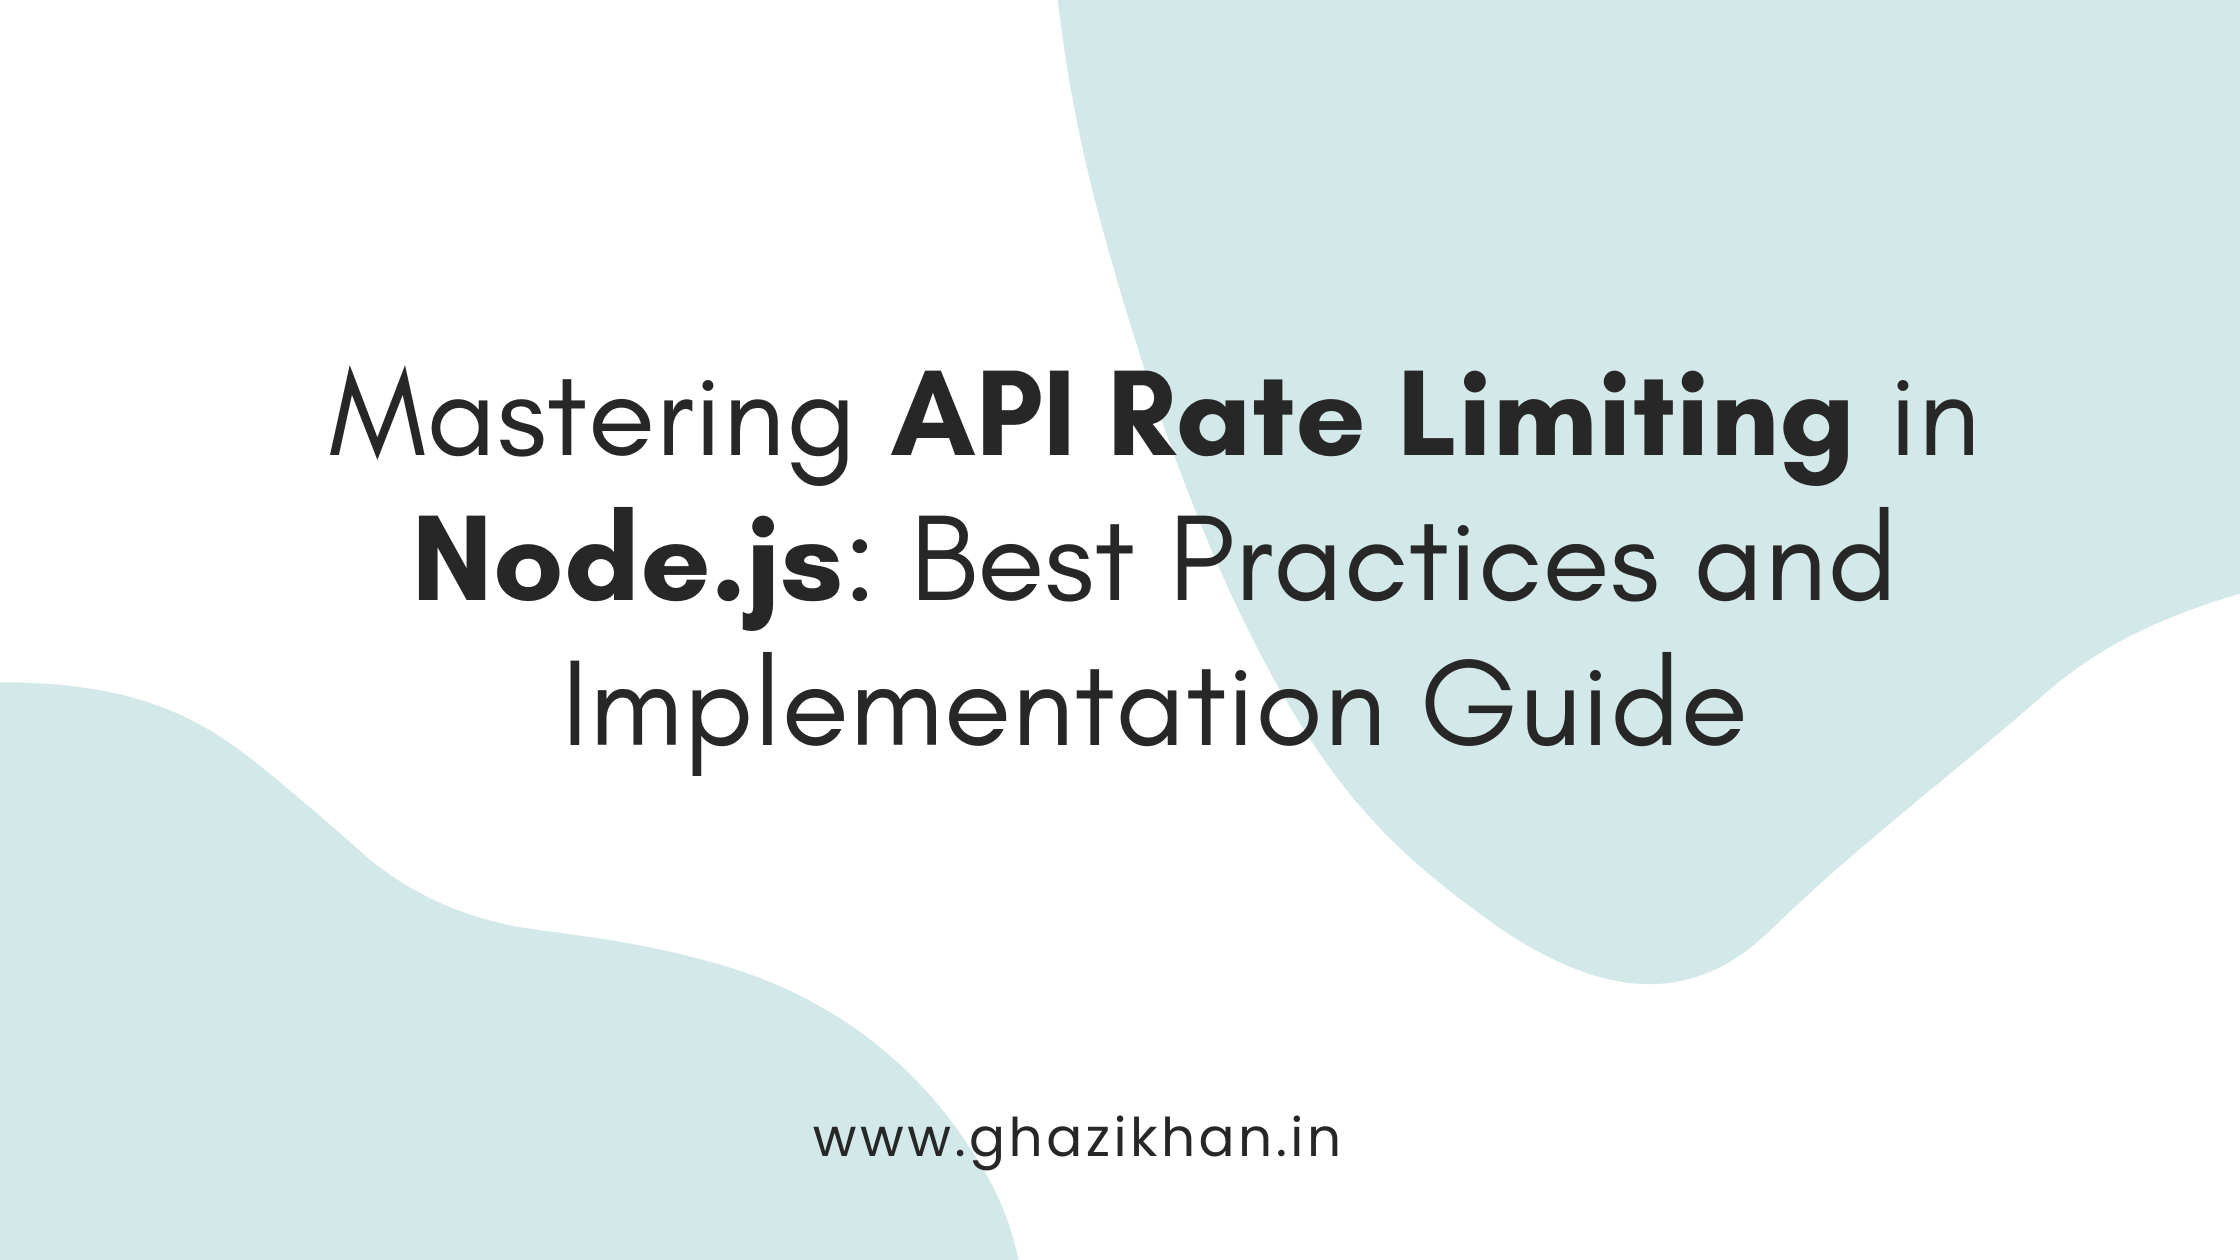 Mastering API Rate Limiting in Node.js: Best Practices and Implementation Guide